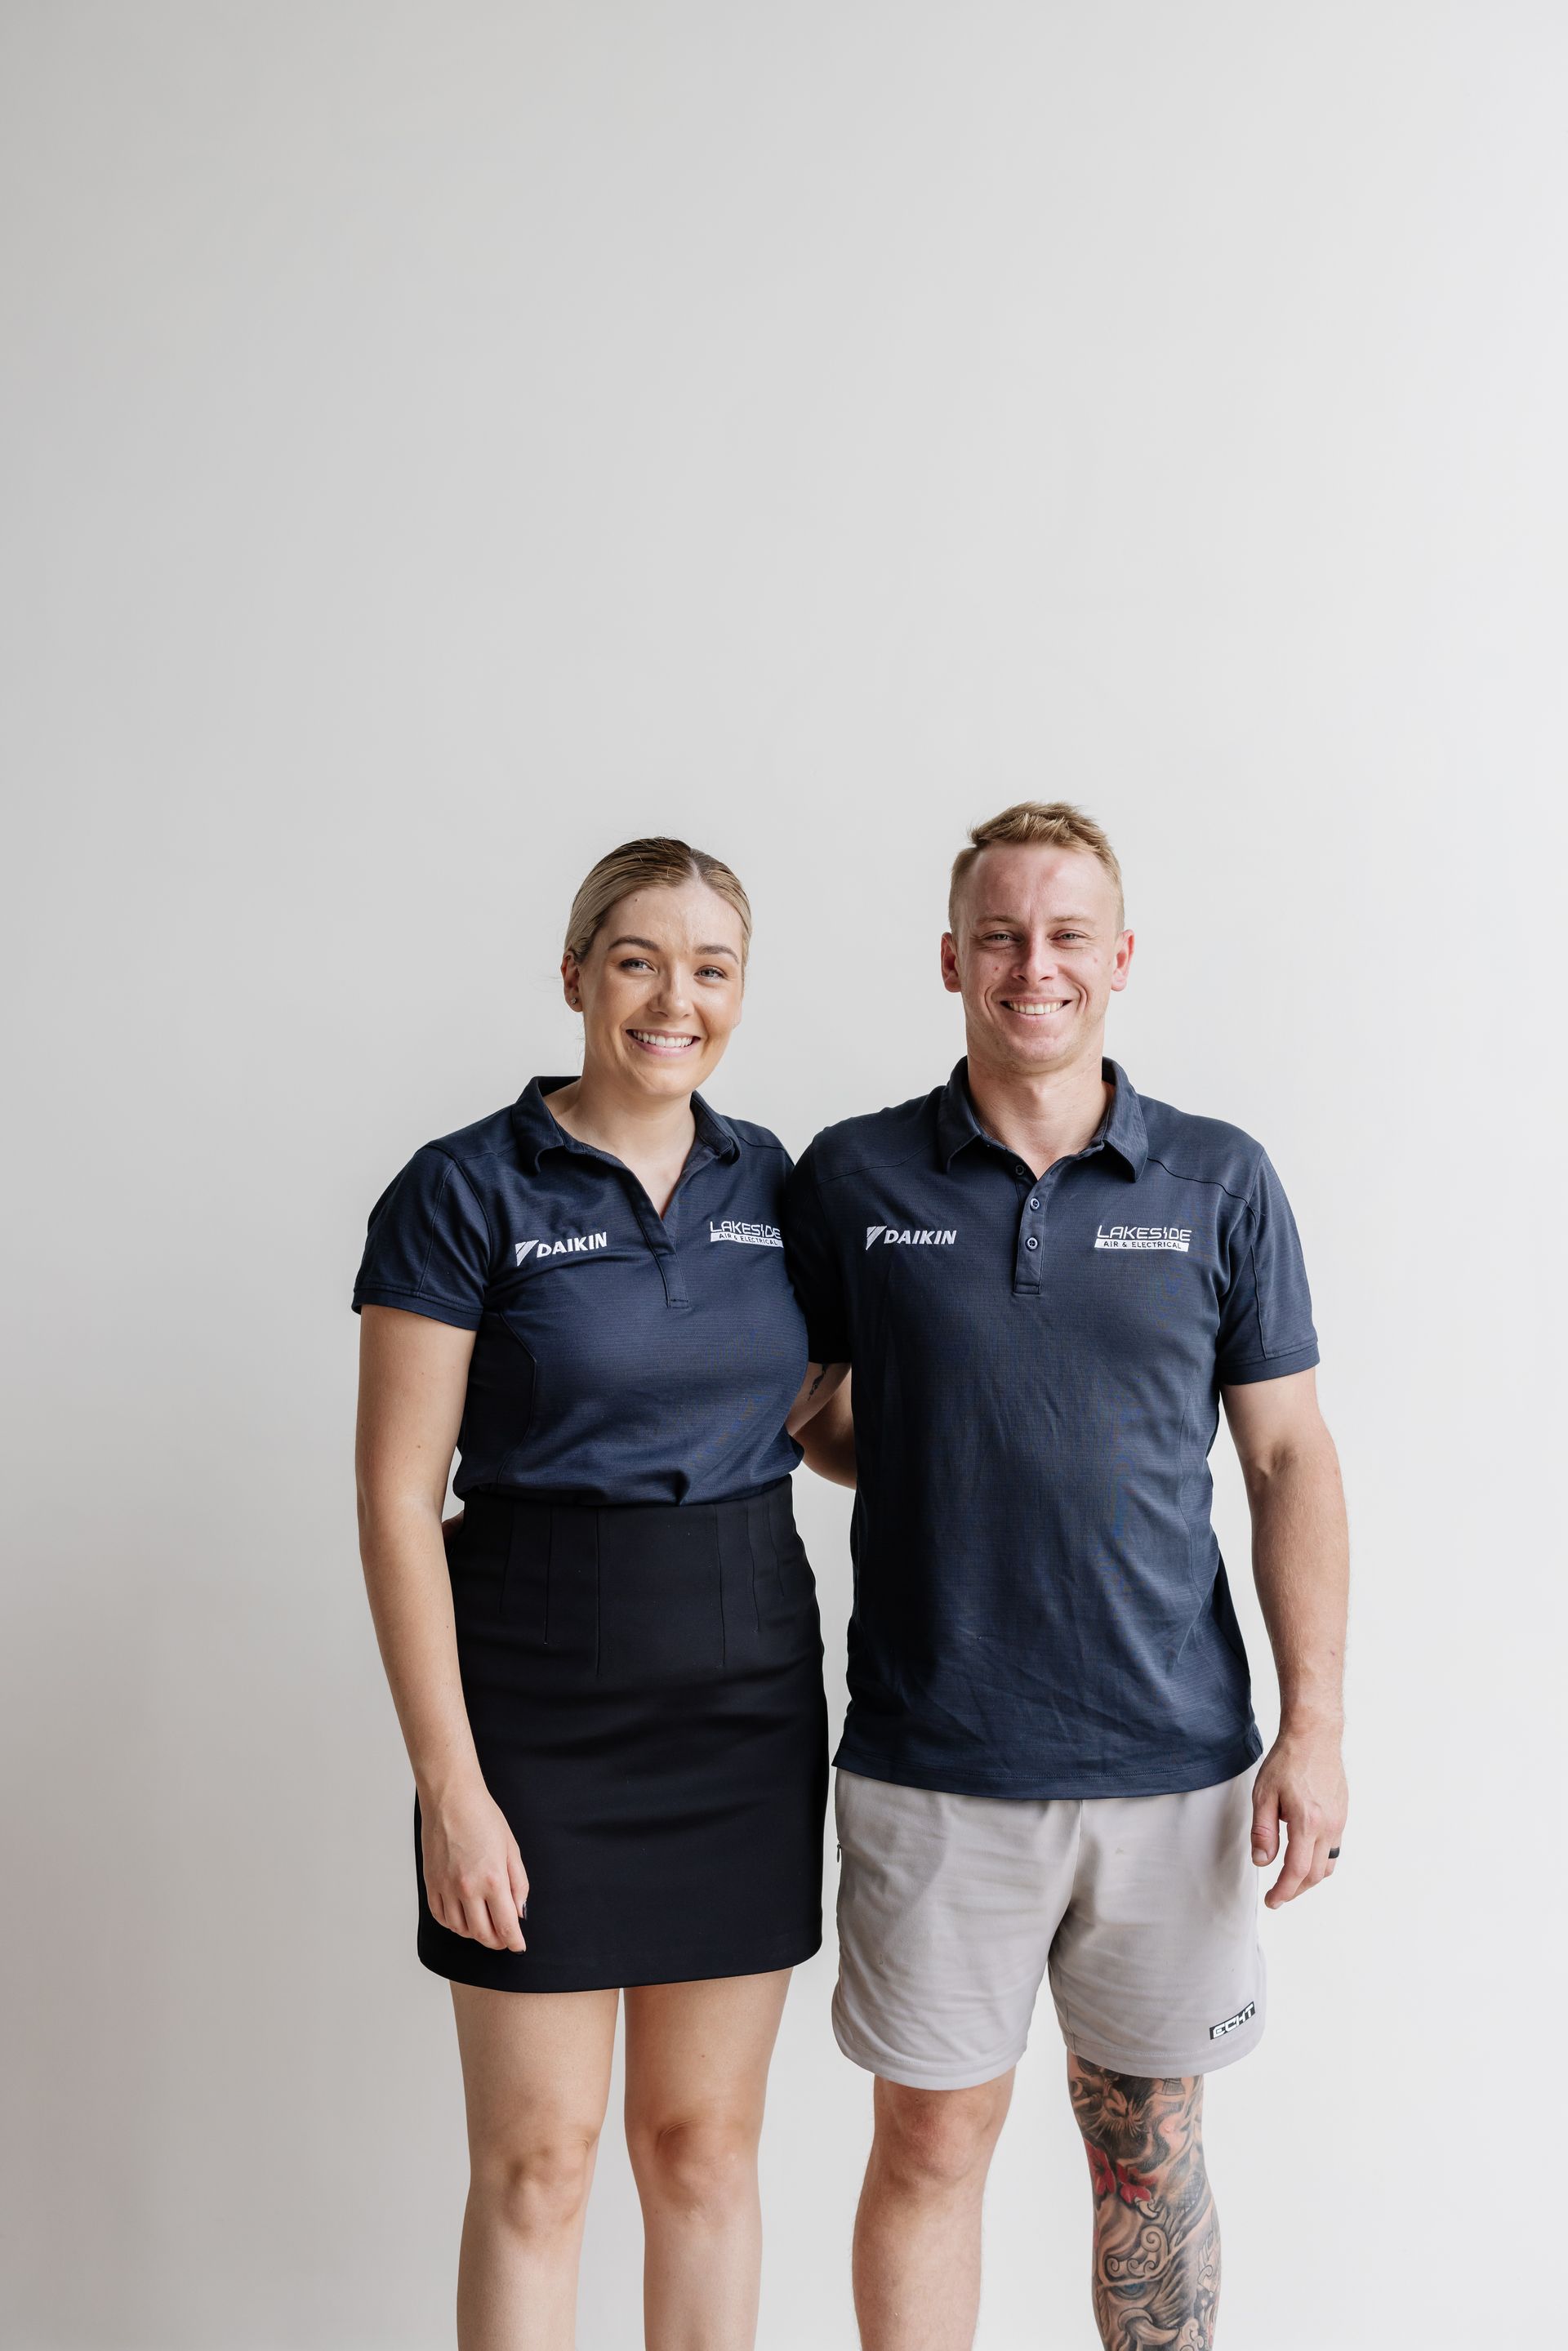 Jackson and Emma Reardon, owners of Lakeside Air & Electrical in Lake Macquarie. A business with over 20 years experience in Air Conditioning and Electrical services.